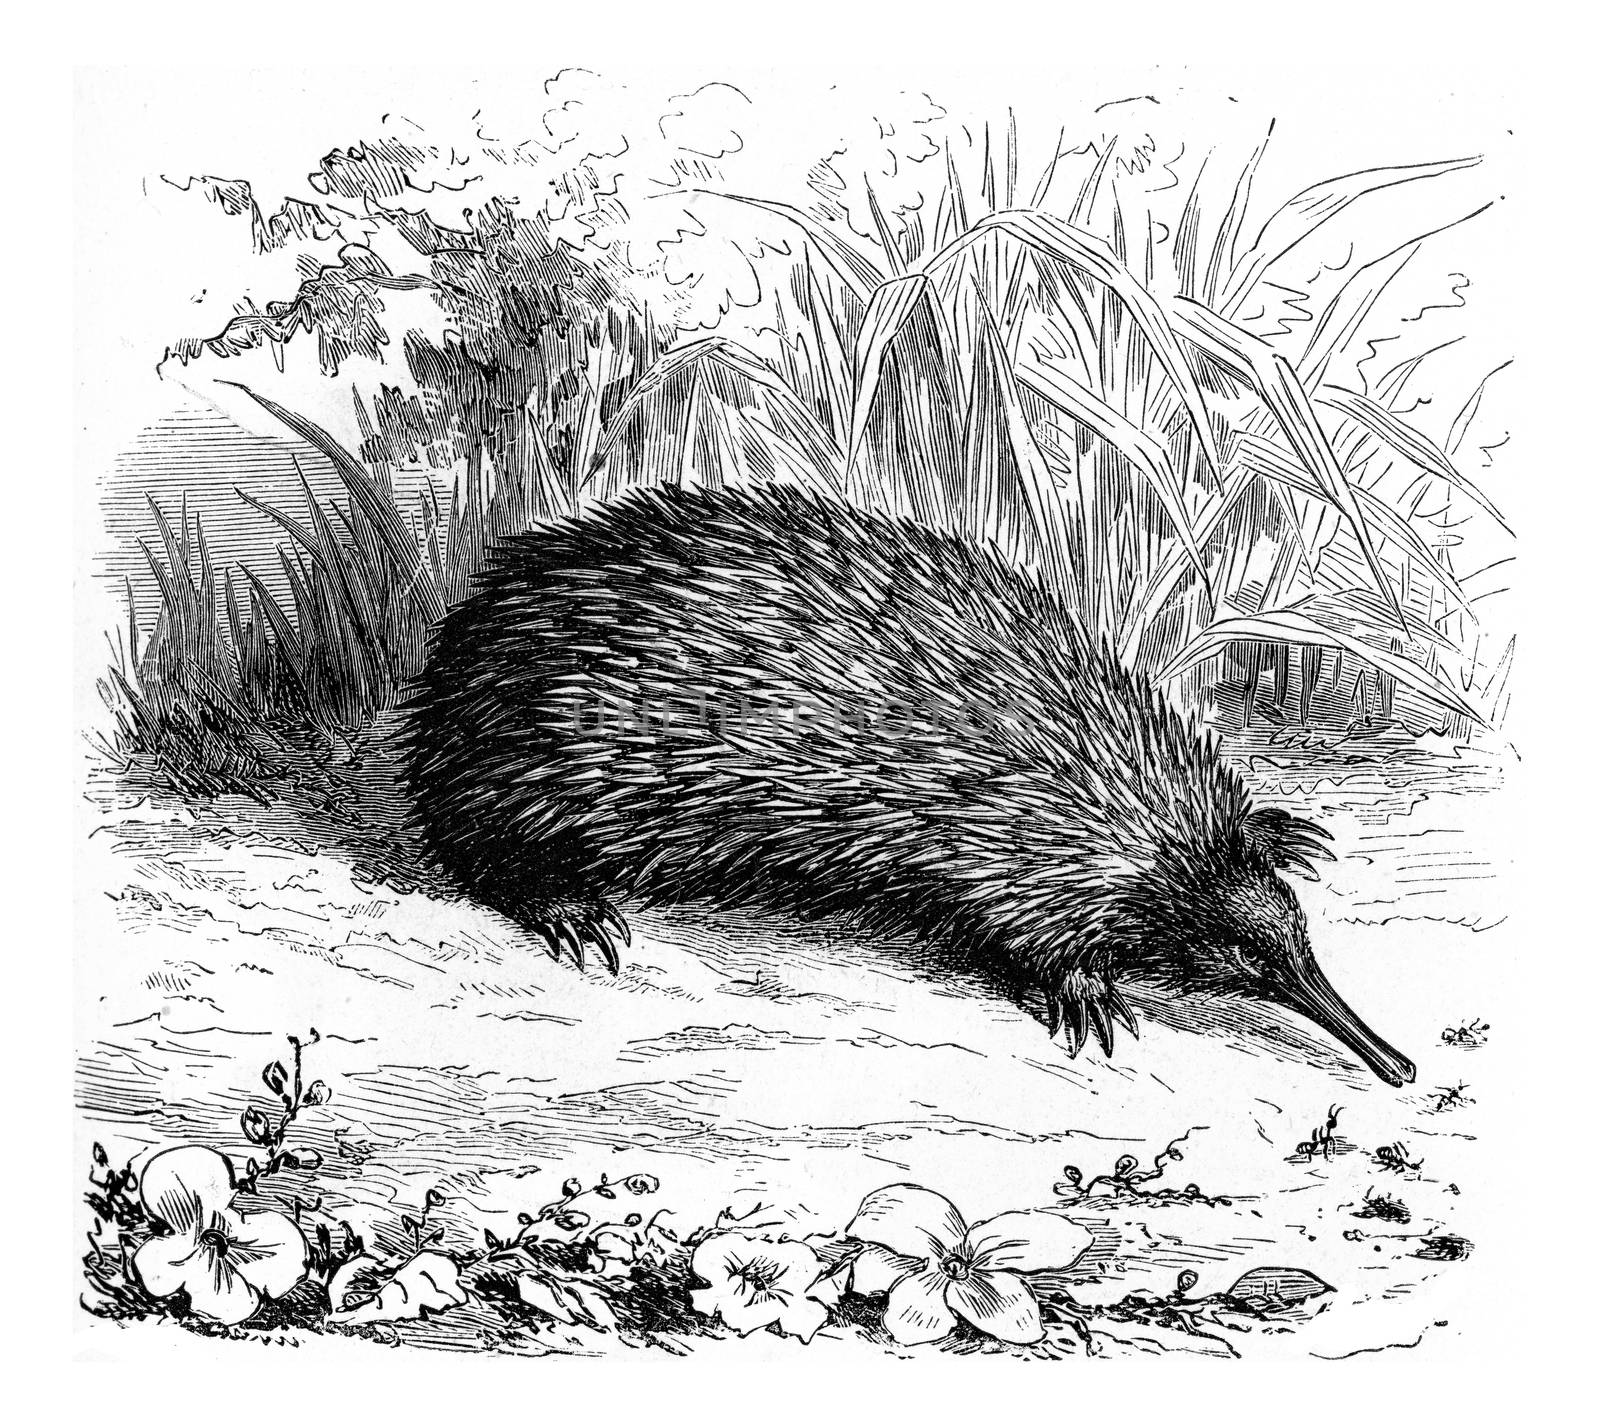 Echidna, vintage engraved illustration. From Zoology Elements from Paul Gervais.
